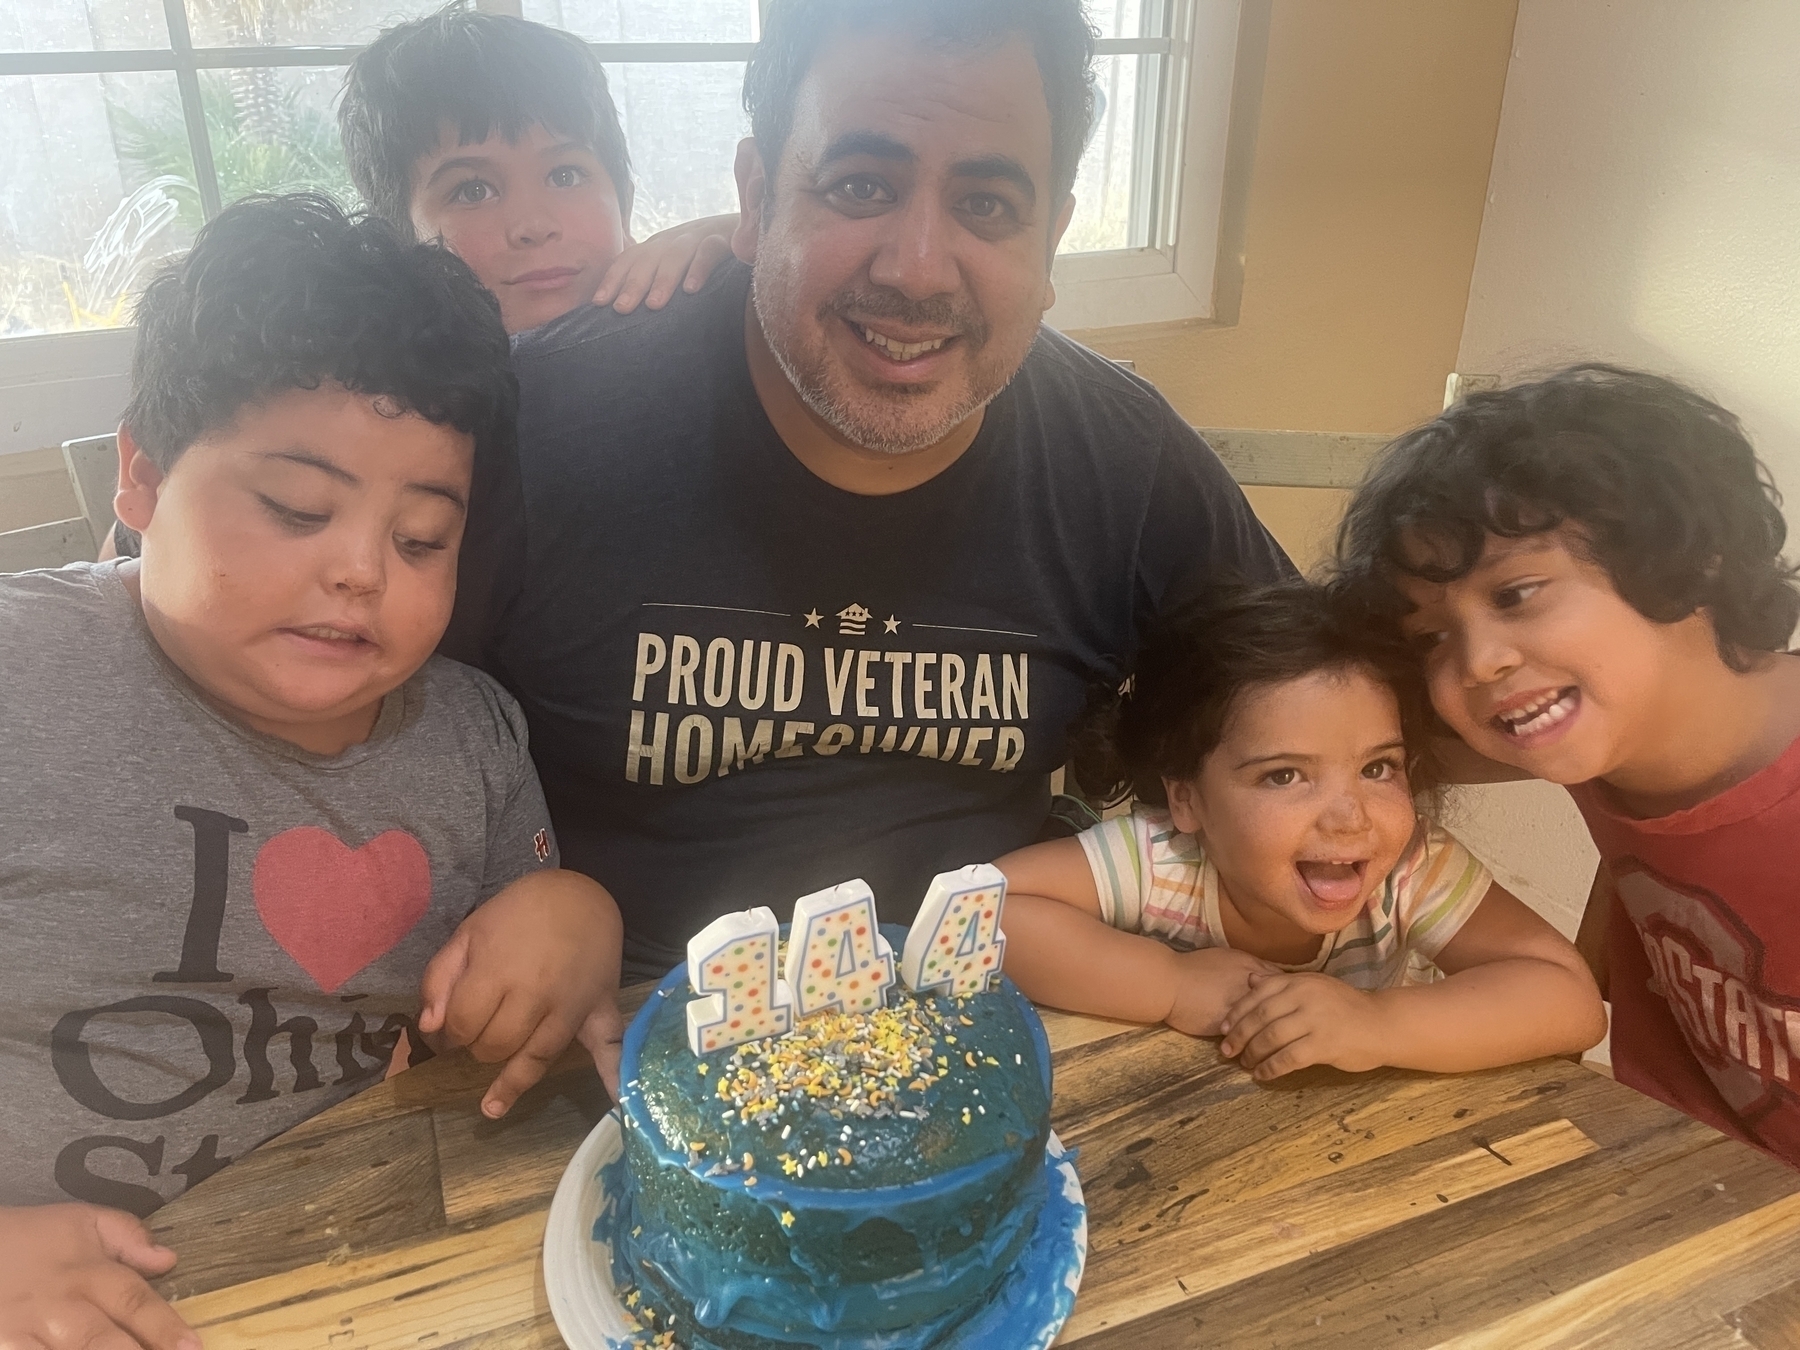 Portrait of author with his four kids and a birthday cake.